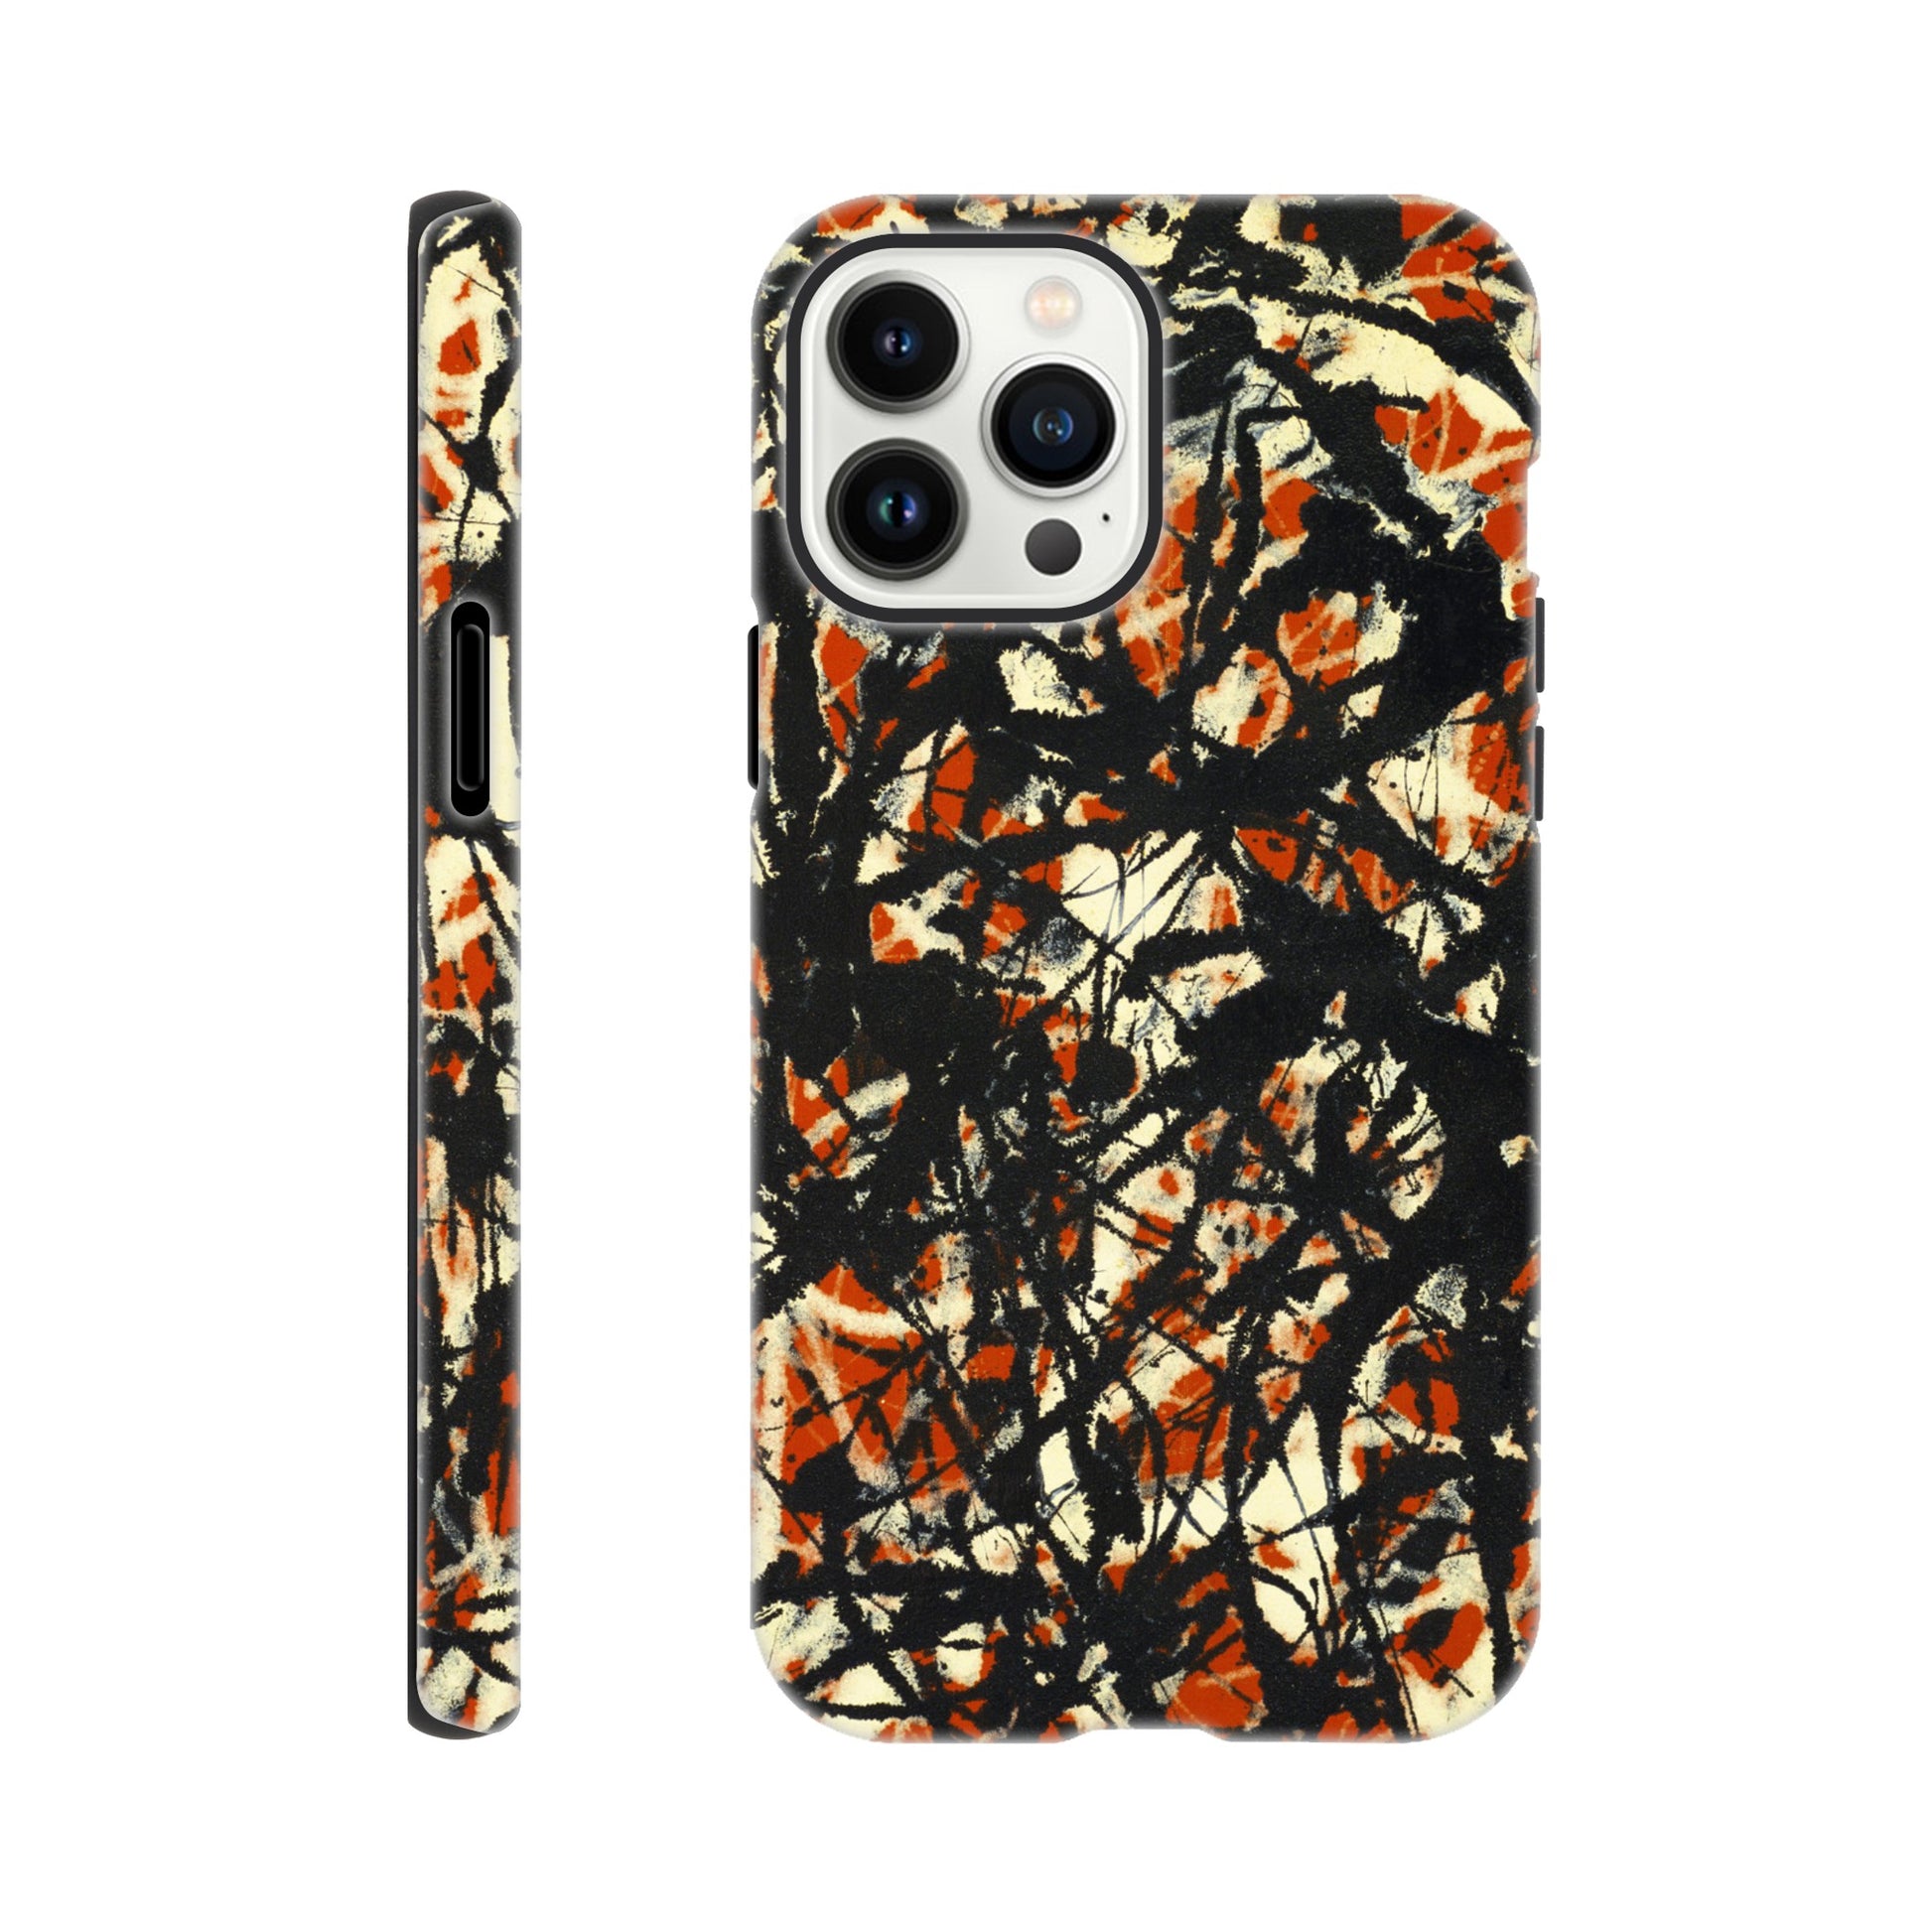 a phone case with a black and orange design